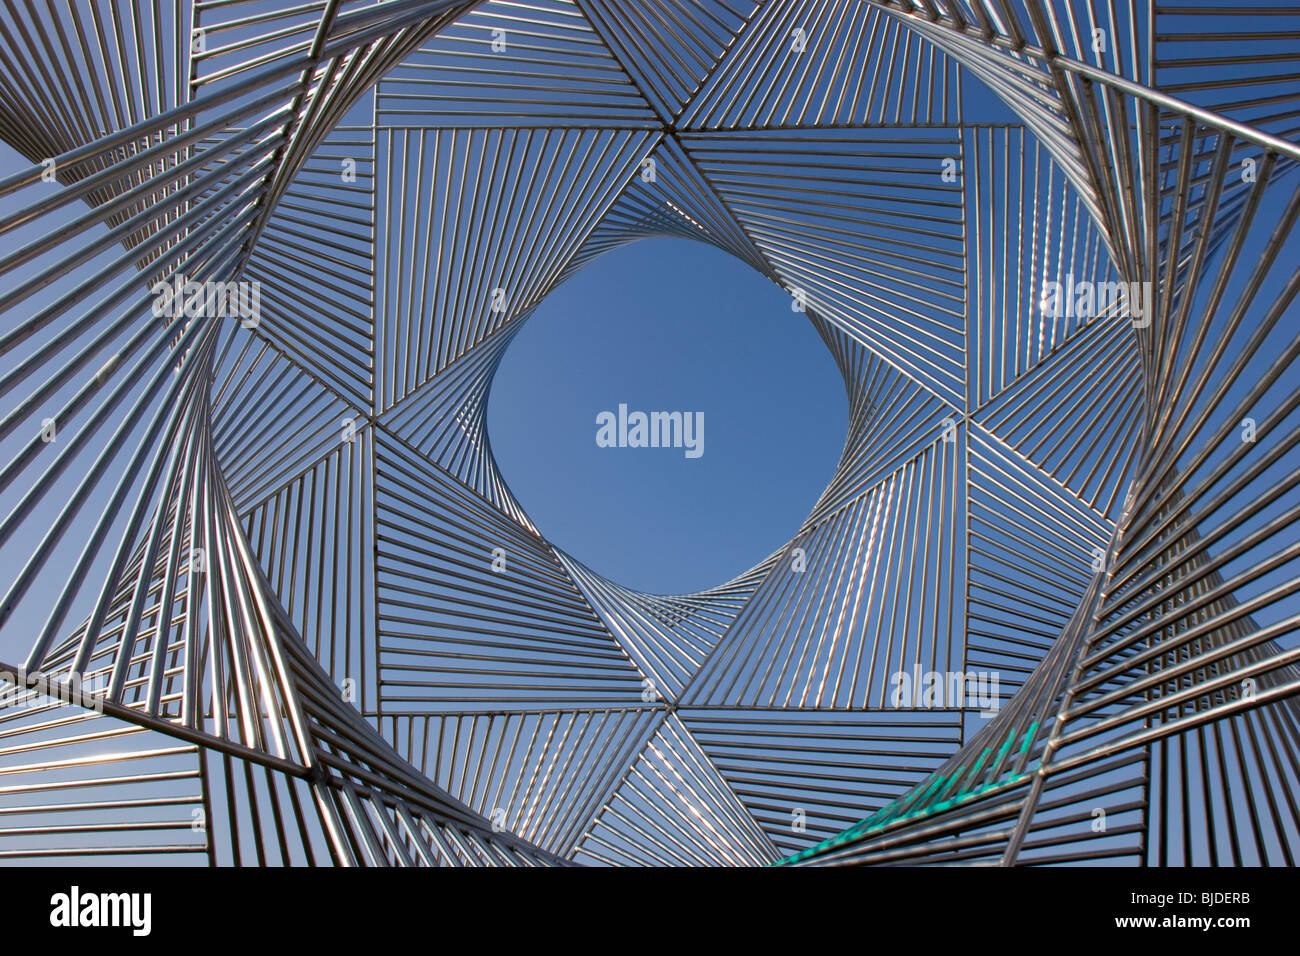 Stainless steel sculpture at entrance to marina at Lausanne Switzerland near Olym pic park Stock Photo